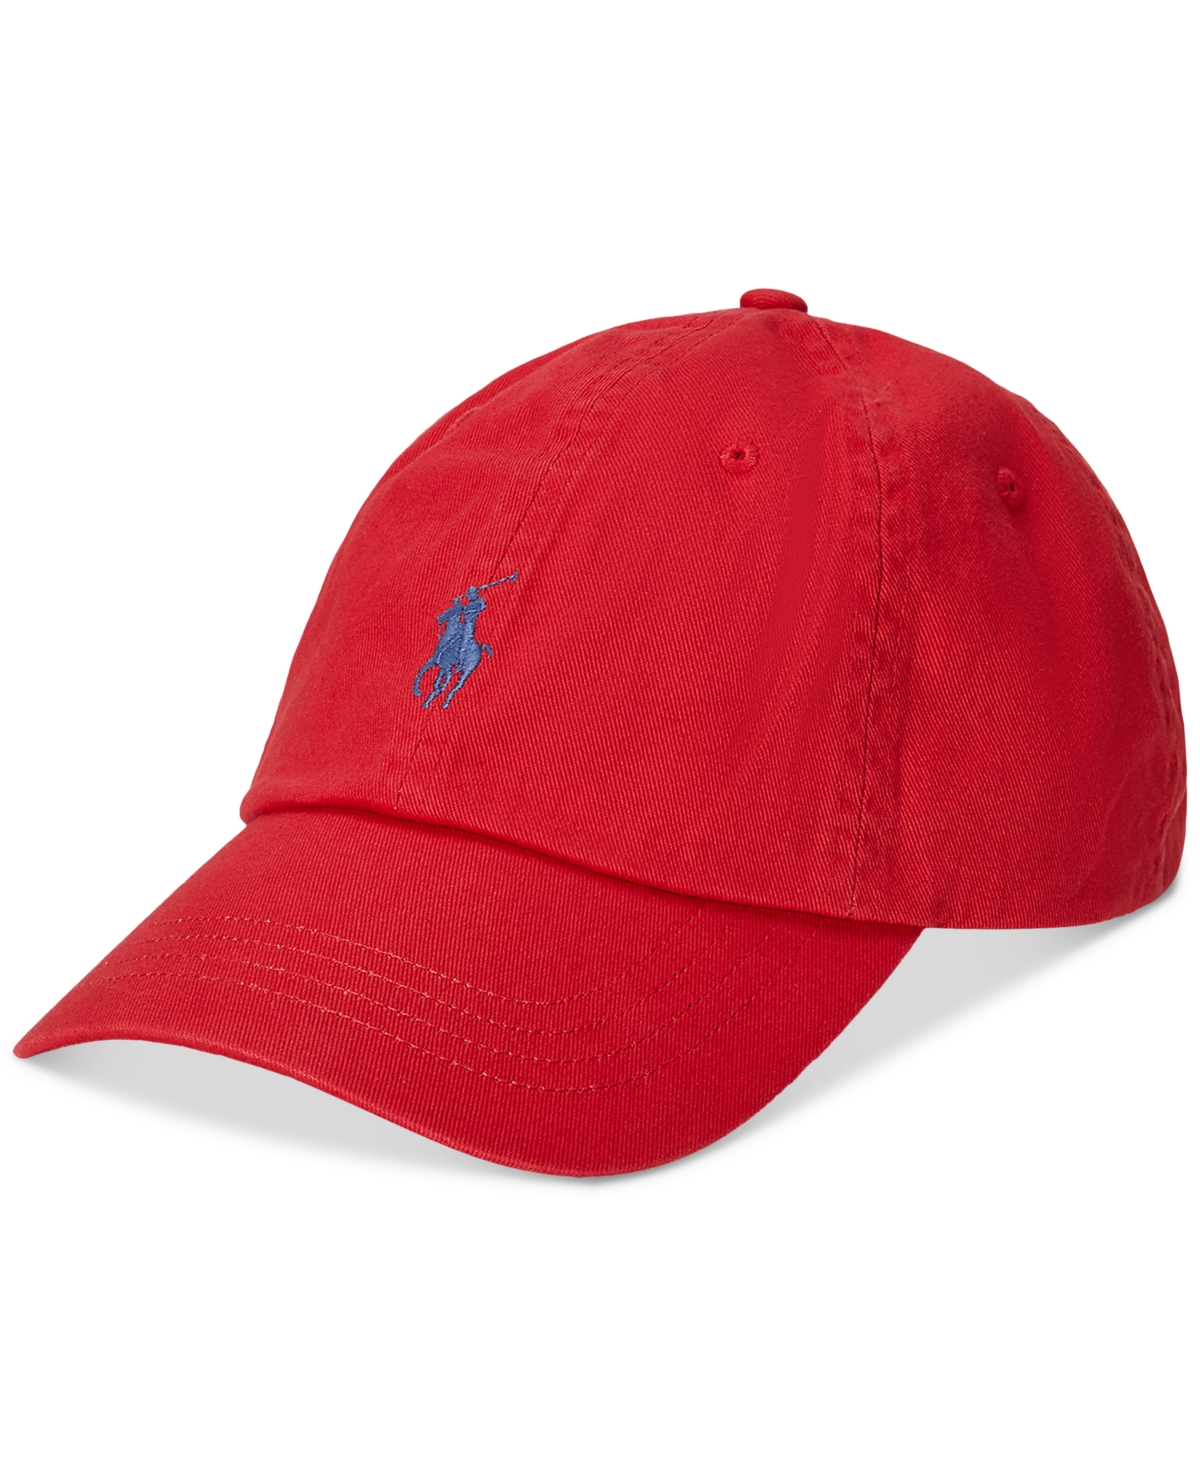 Polo Ralph Lauren Cotton Chino Ball Cap Man Hat Red Size Onesize Cotton In Post Red